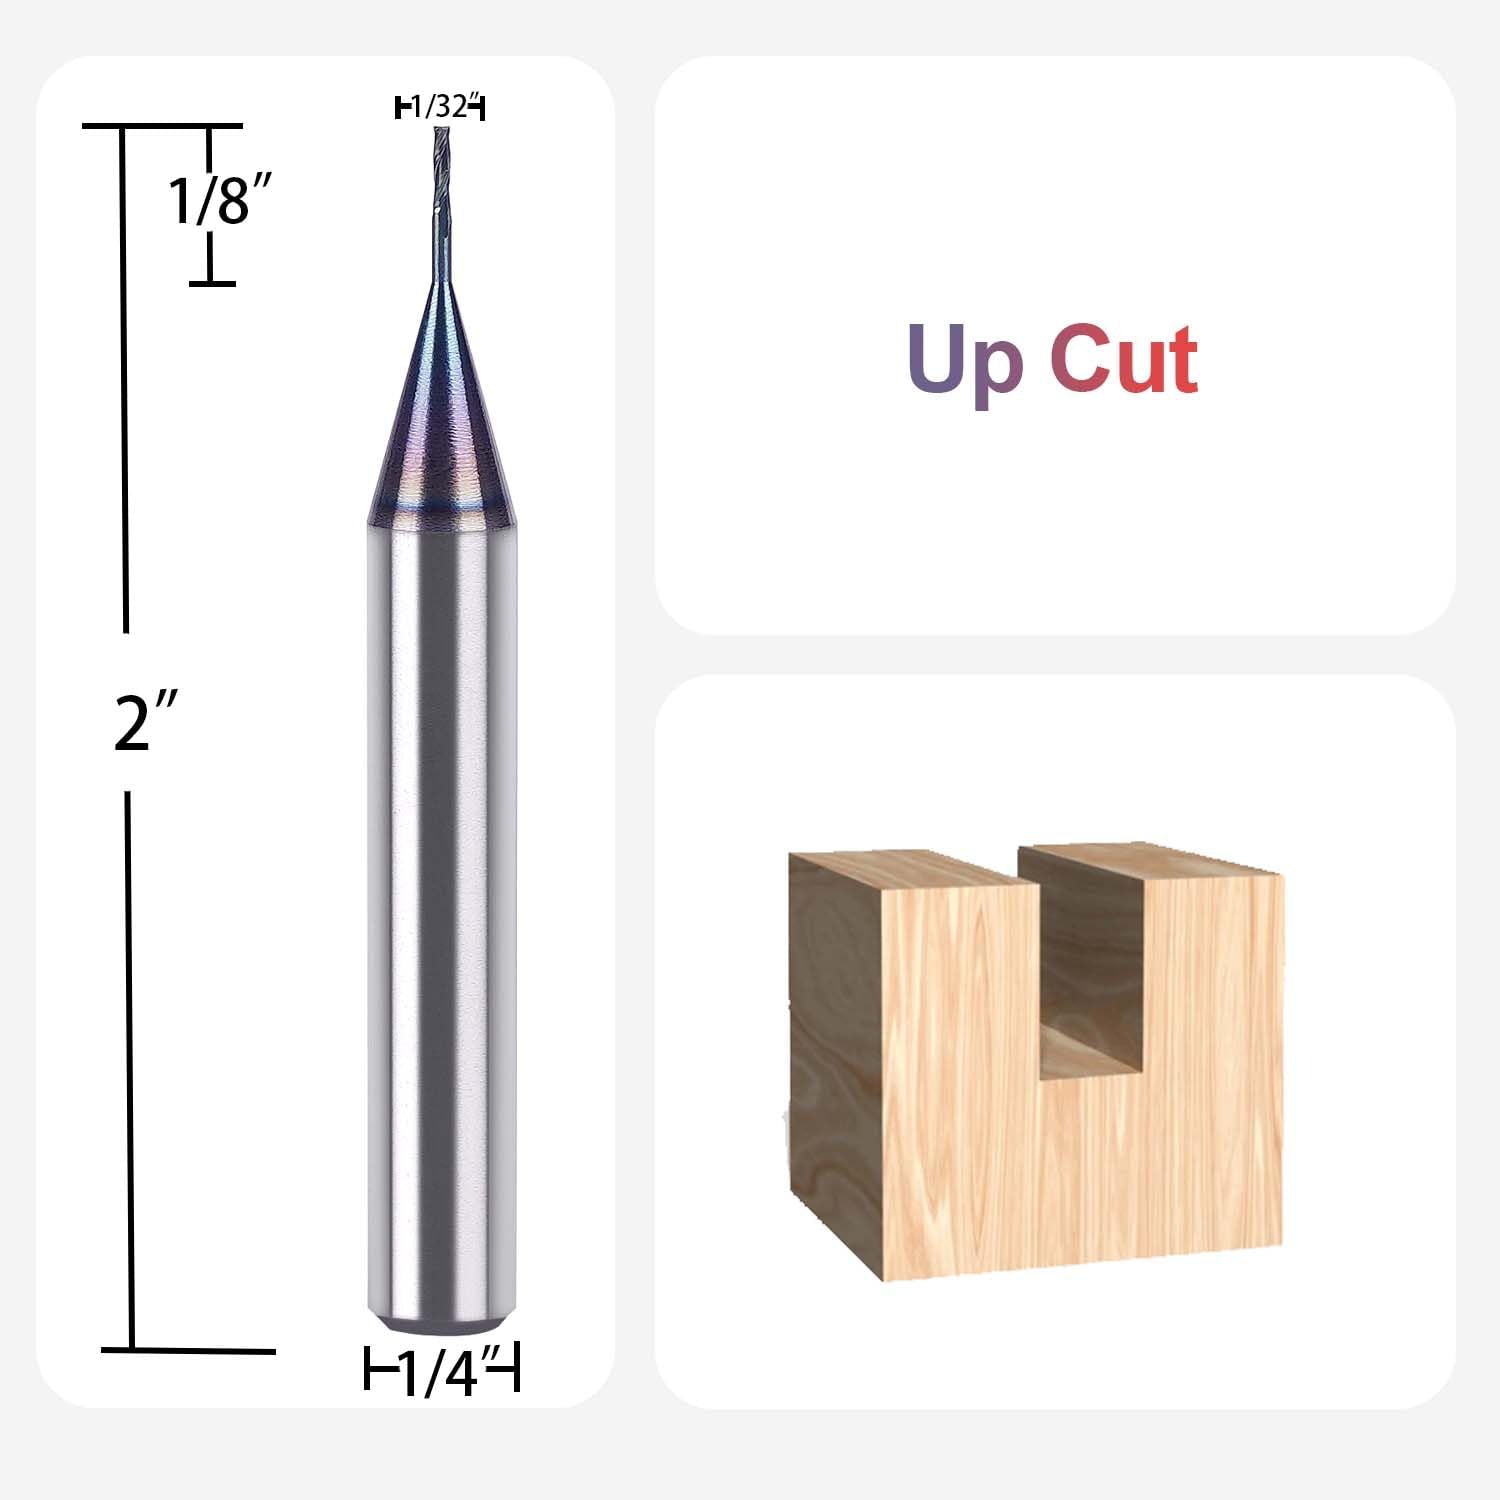 SpeTool 1/32 Upcut End Mill 1/4 Shank Extra tool life coated Router Bit